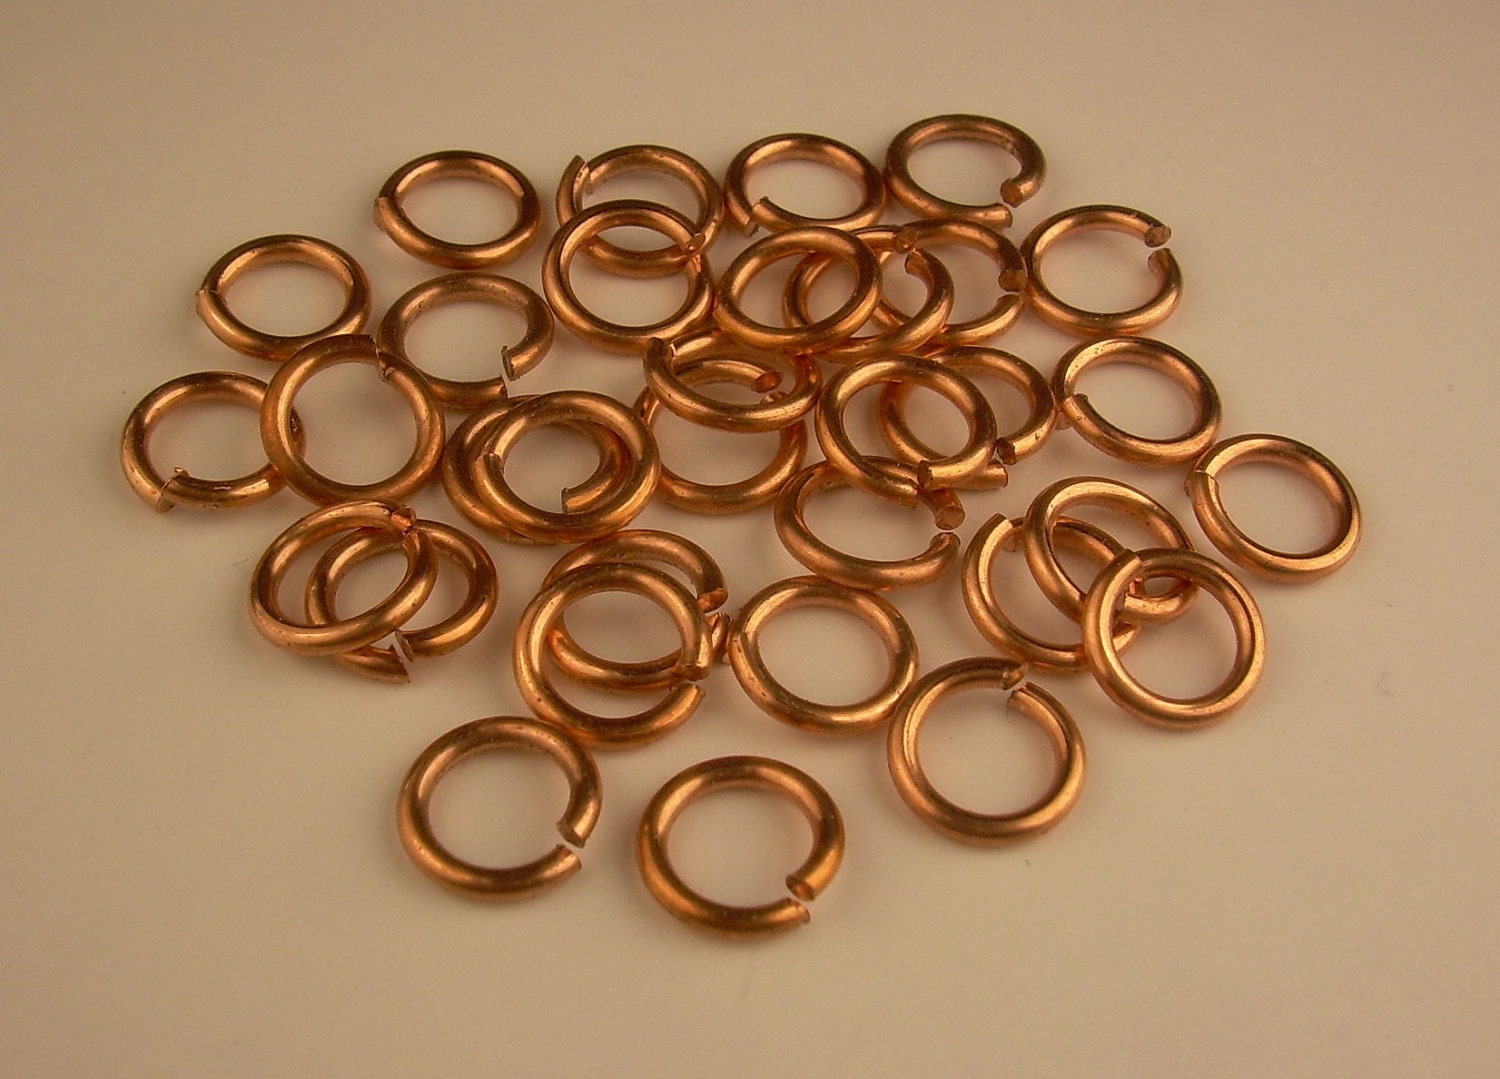 Jump Rings 12mm Large Silver Plated Open Jump Rings Brass 